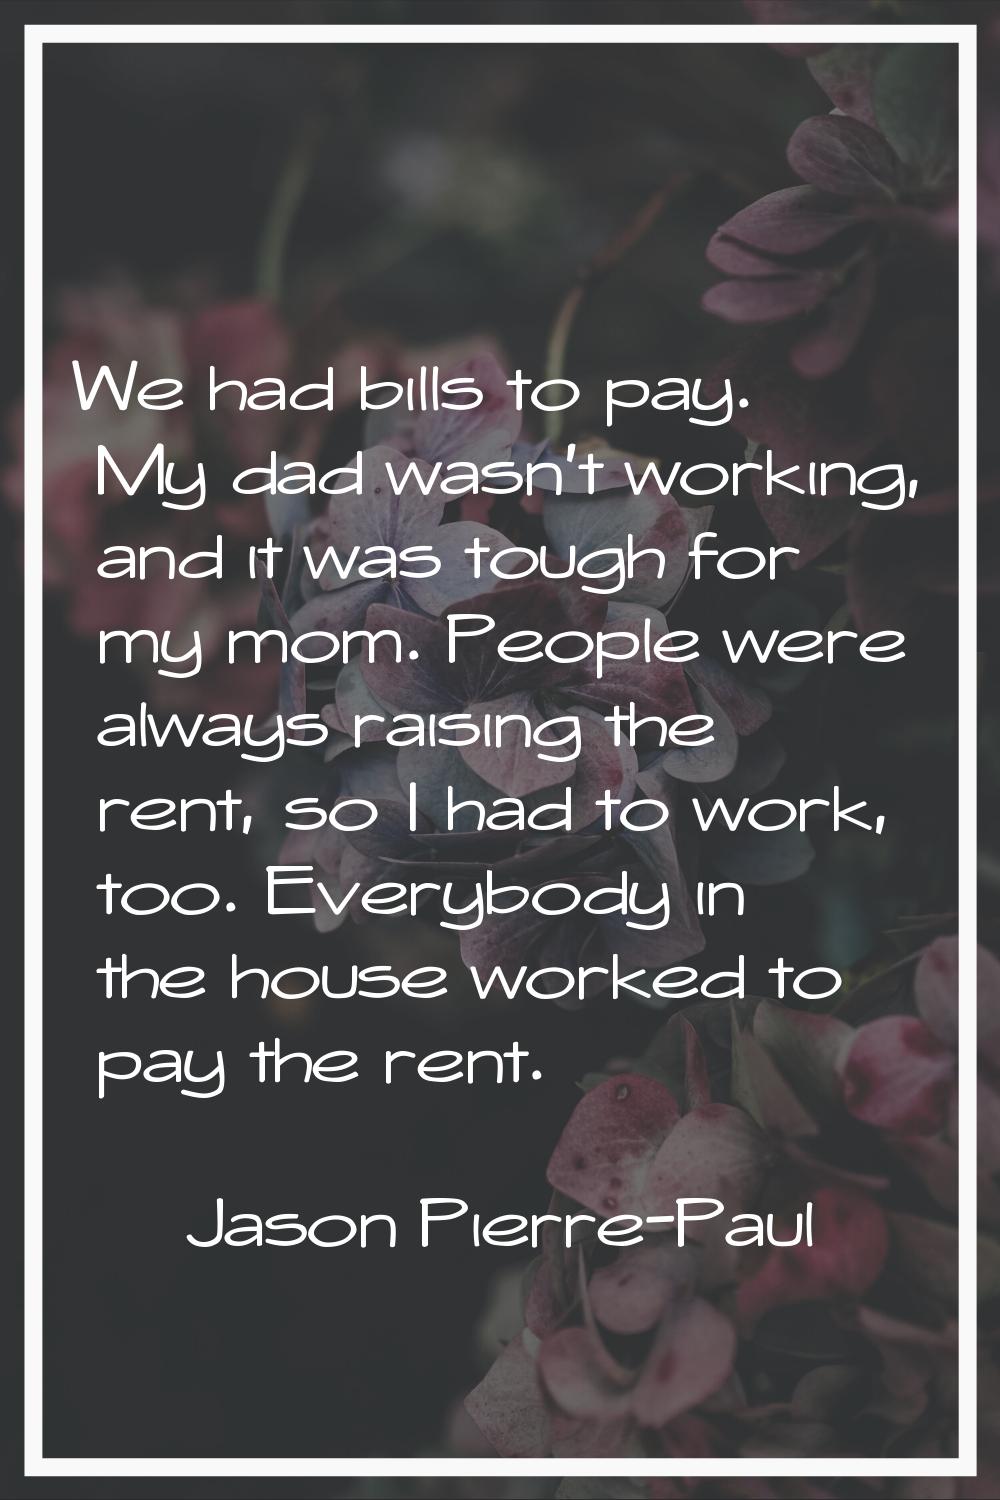 We had bills to pay. My dad wasn't working, and it was tough for my mom. People were always raising